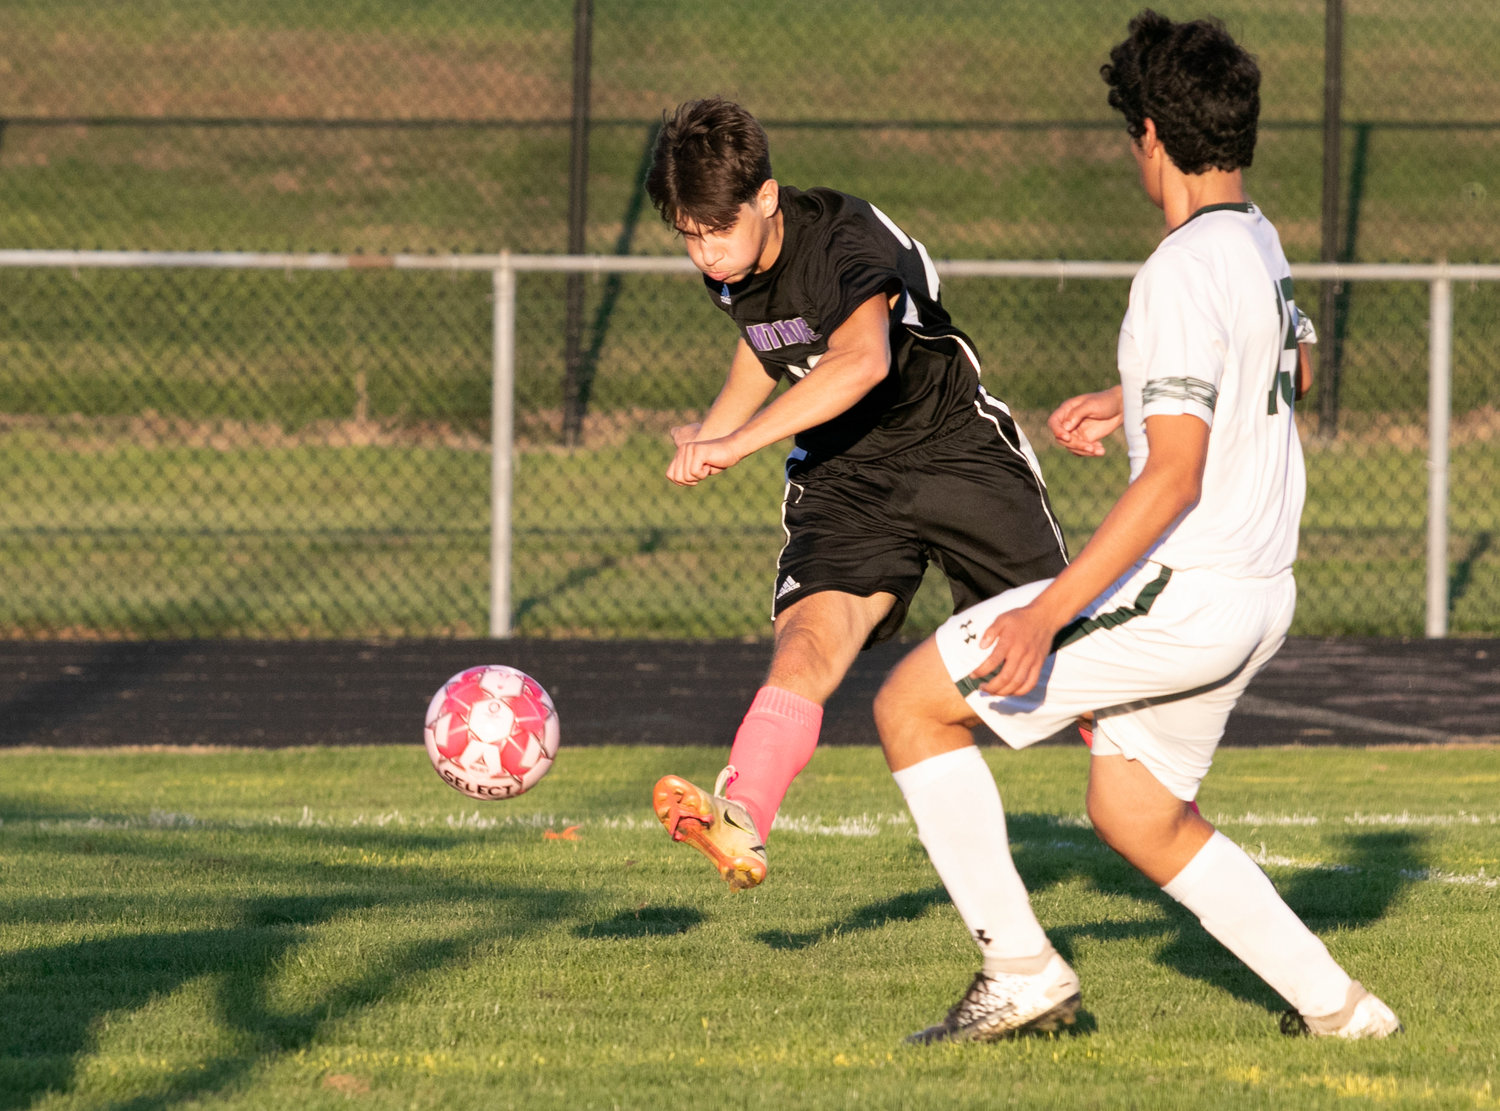 Sophomore winger, Jesse Wilson blasts a shot on goal in the second half.